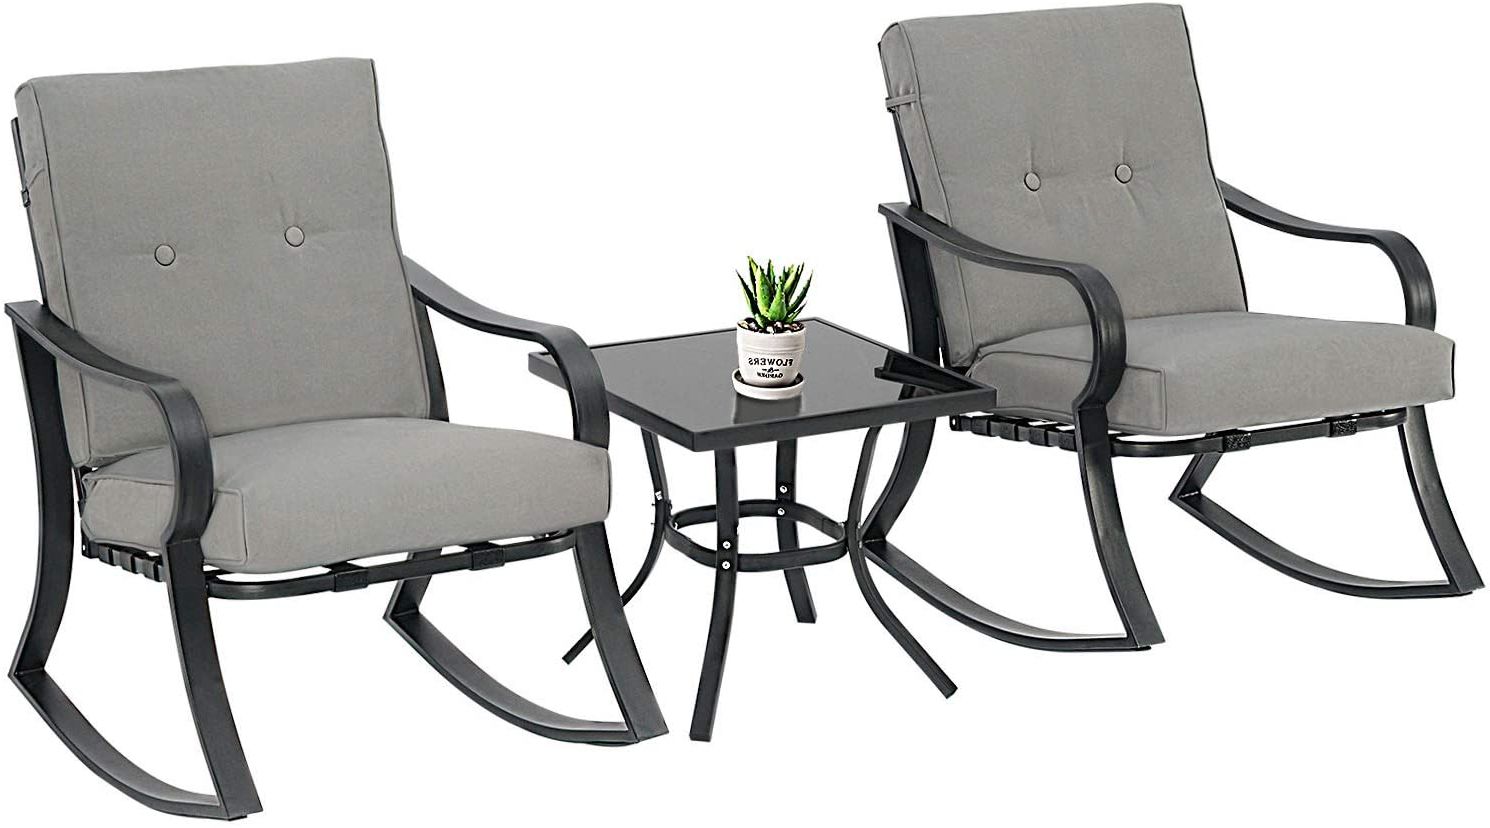 3 Piece Outdoor Rocking Chairs Bistro Set, Black Steel Patio Furniture With Regard To Most Up To Date Outdoor Rocking Chair Sets With Coffee Table (View 7 of 15)